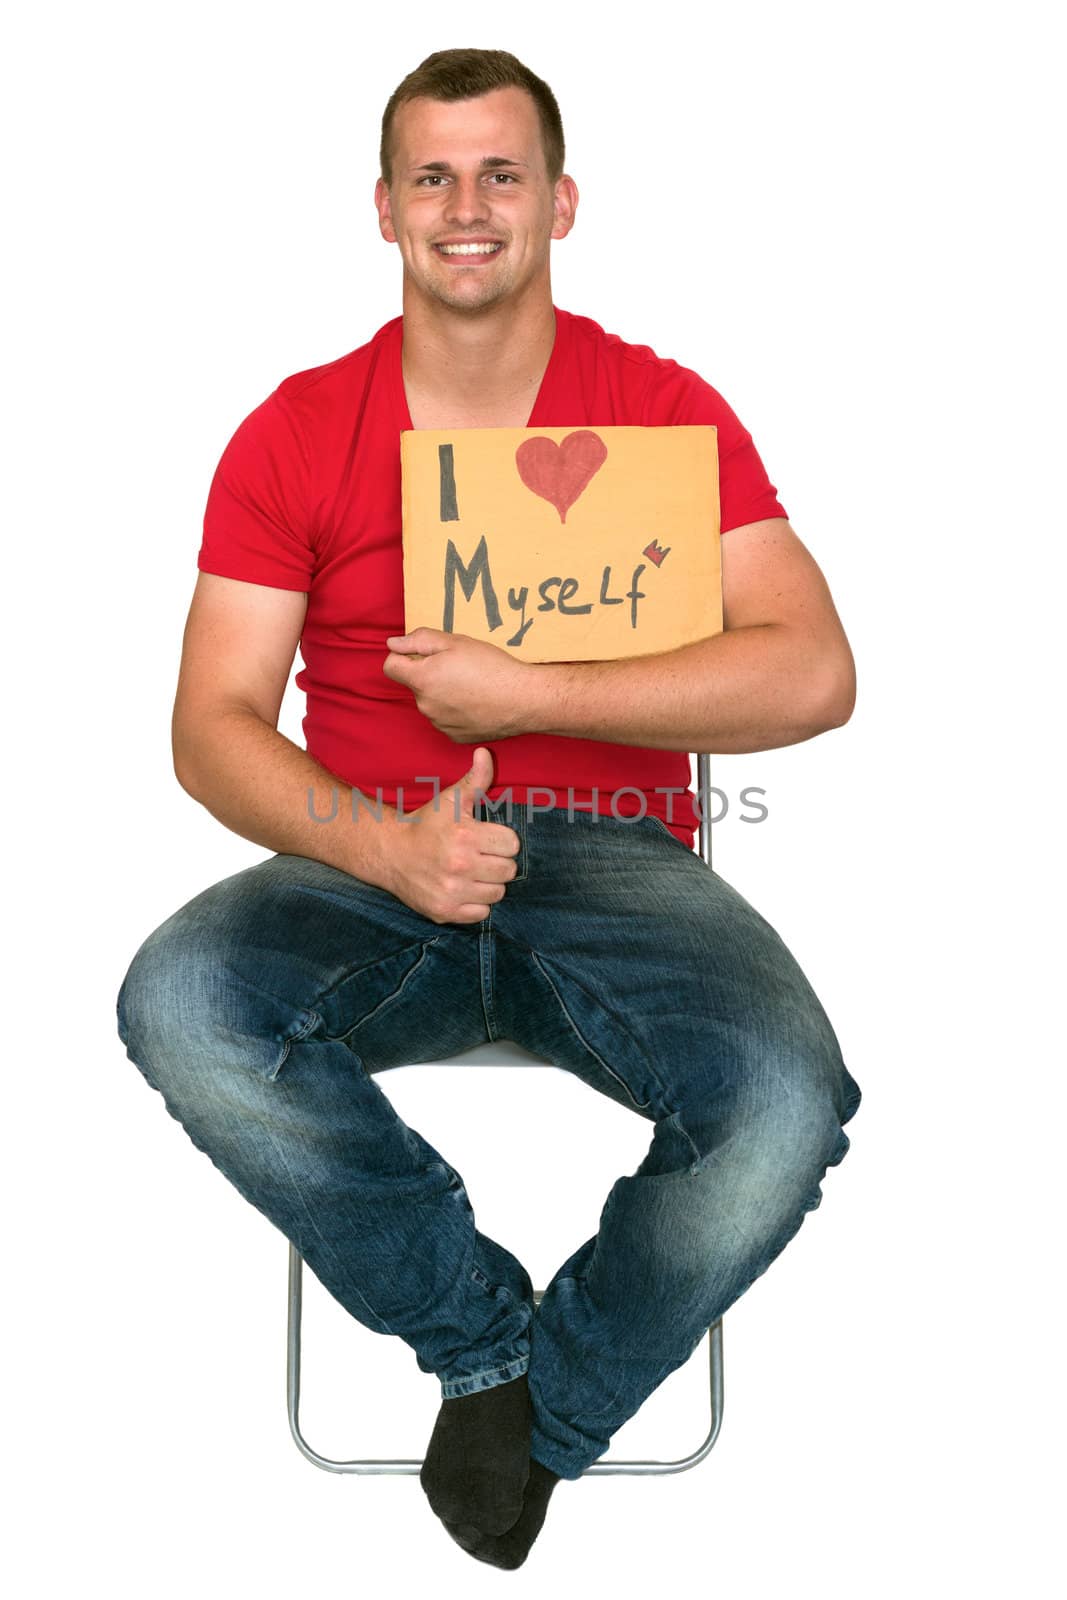 Man Very Happy With I Love Myself Sign by dwaschnig_photo